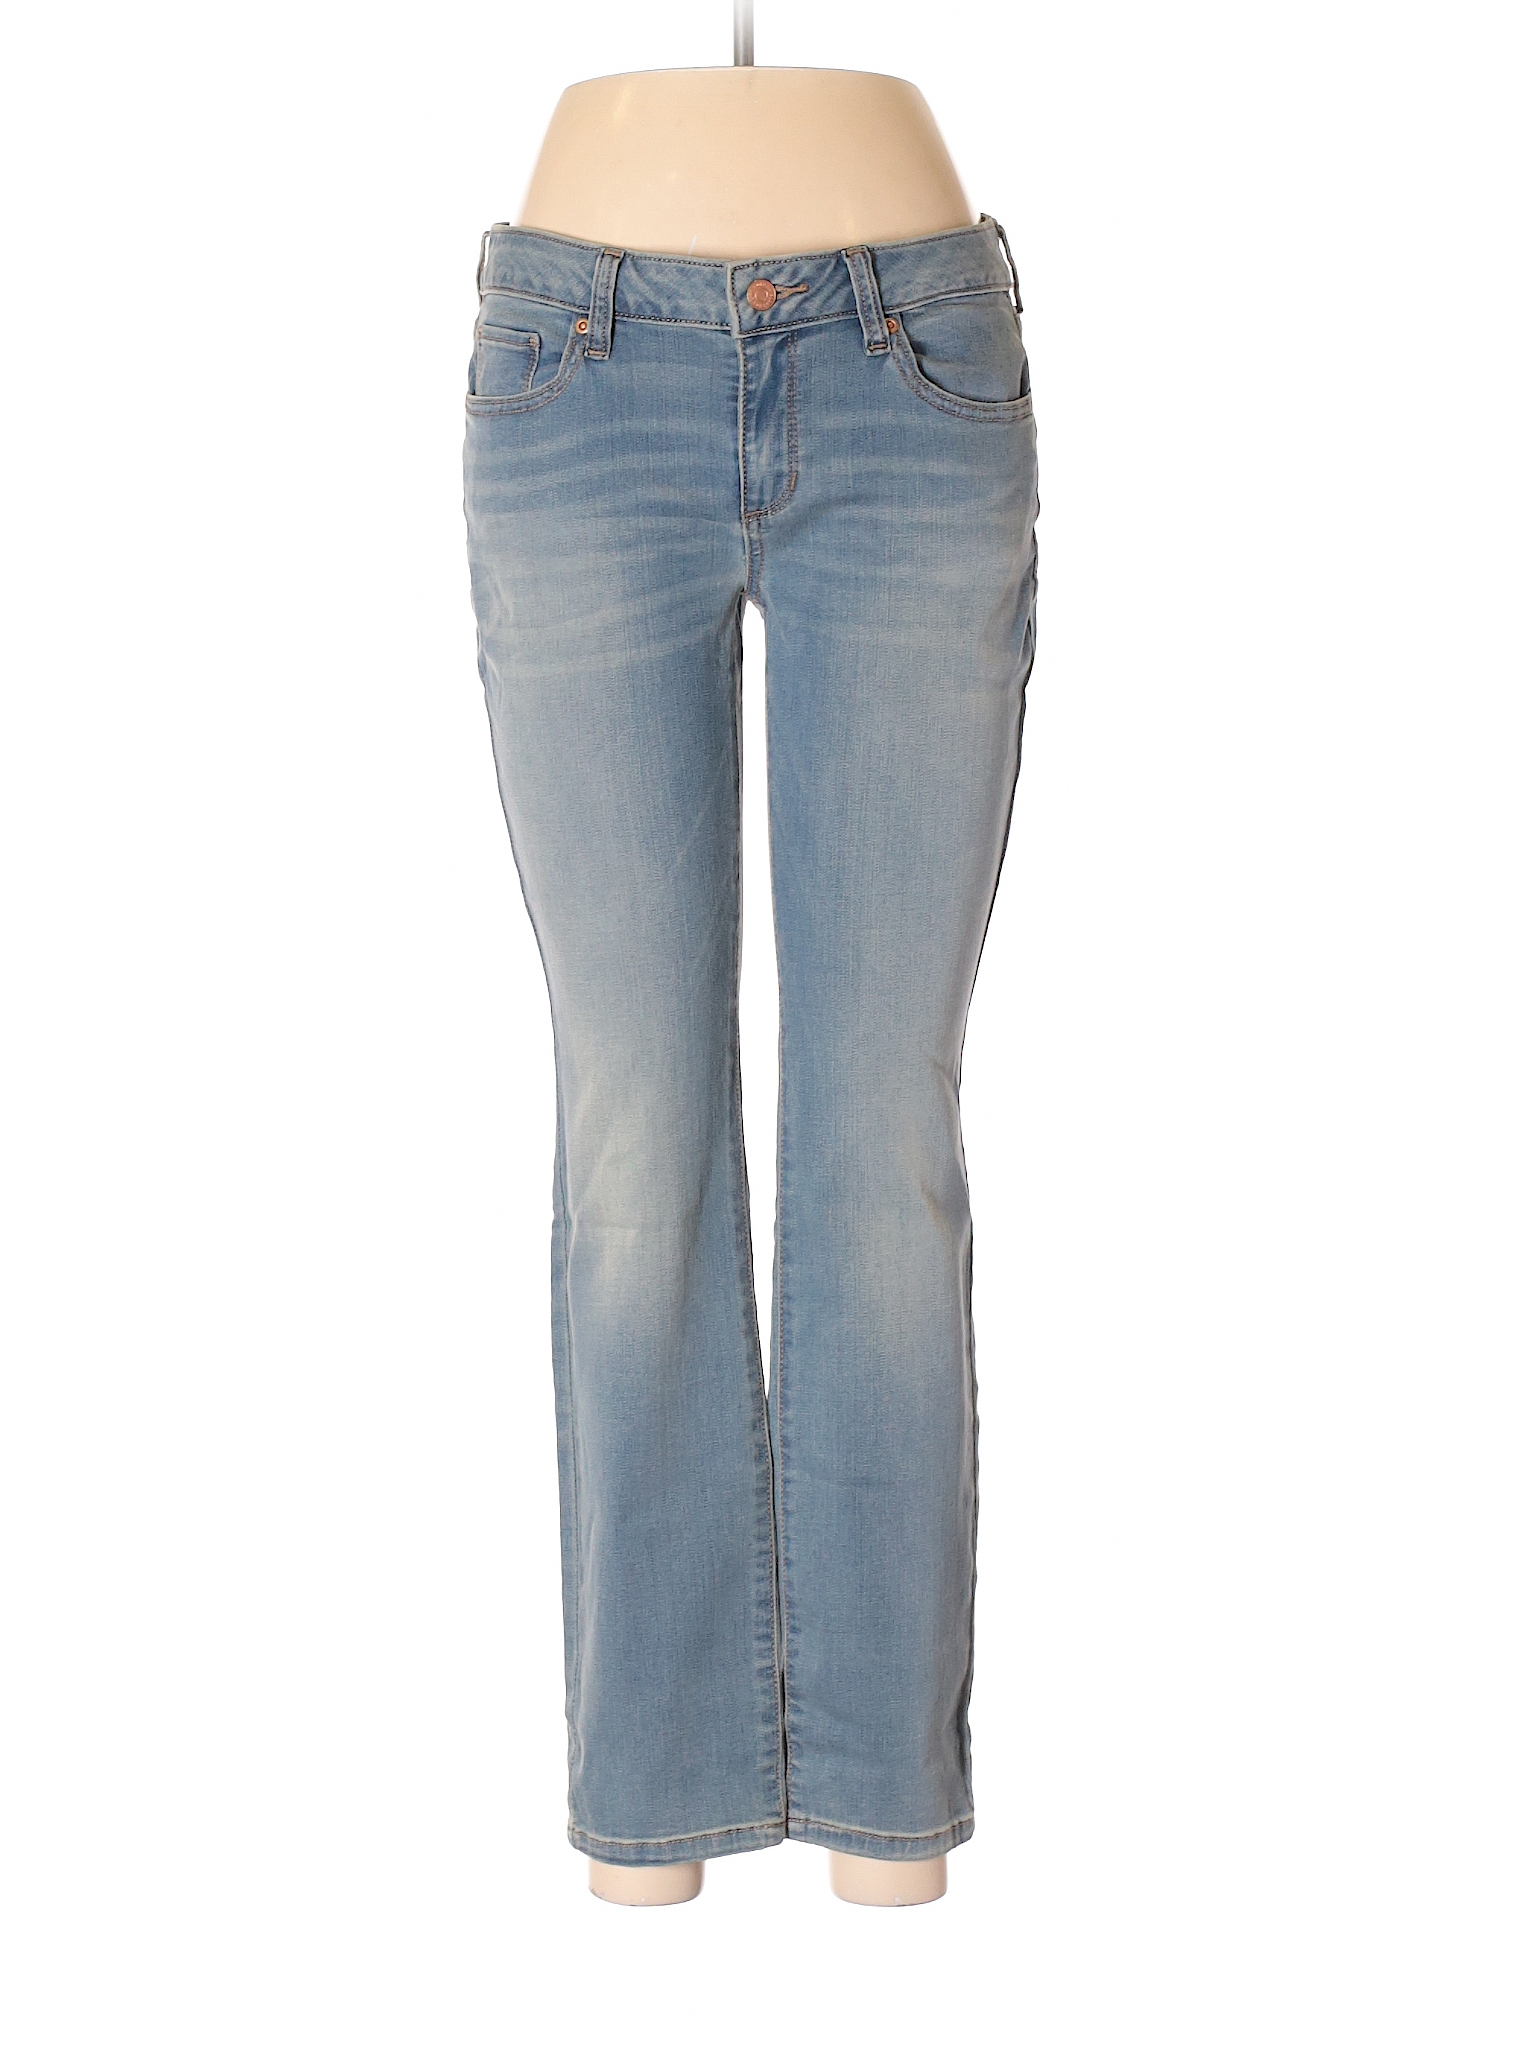 SONOMA life + style Solid Blue Jeans Size 8 (Petite) - 68% off | thredUP